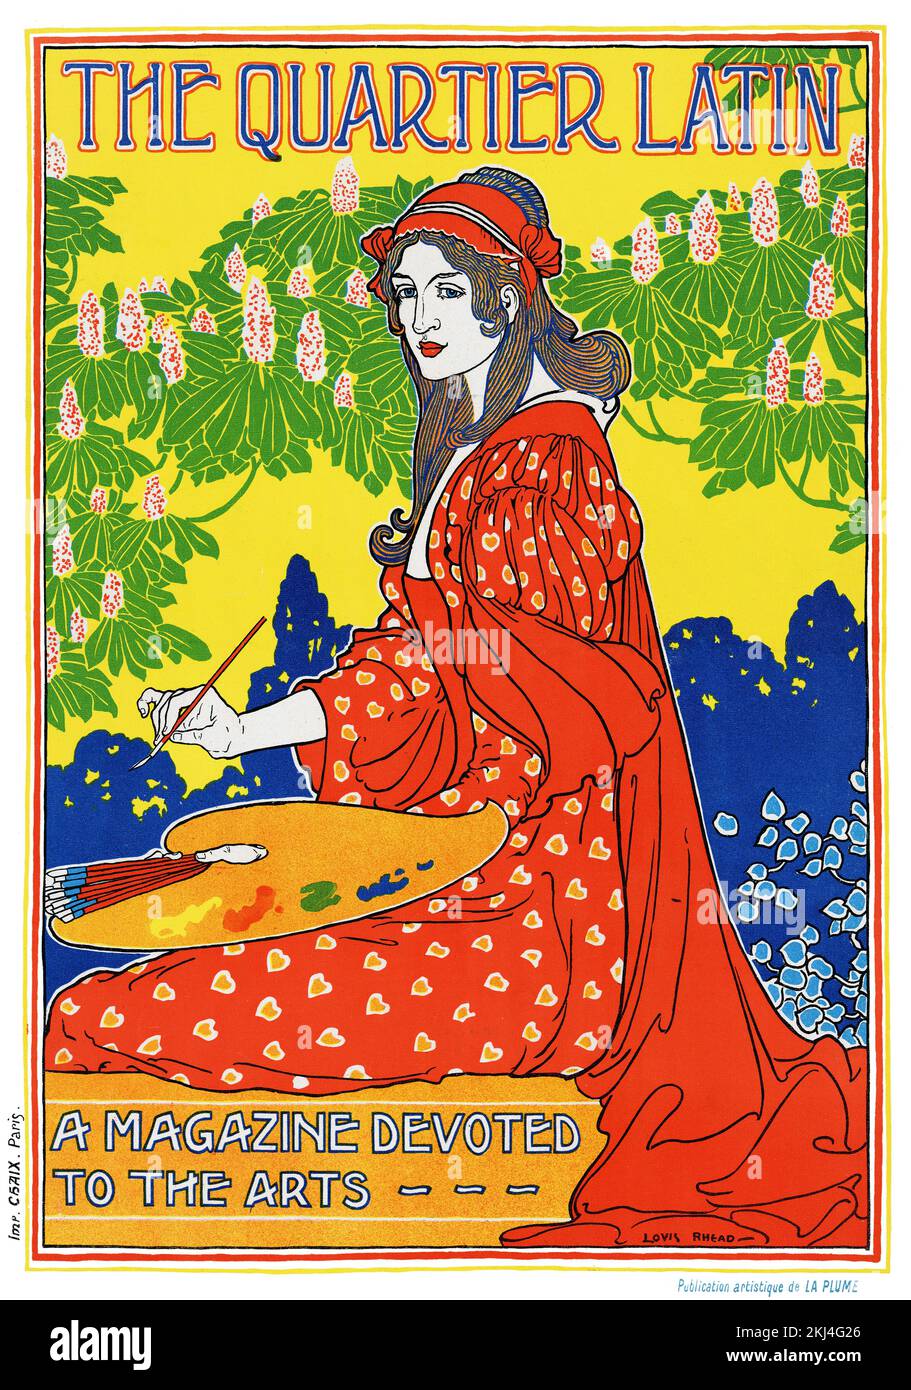 The Quartier Latin by Louis Rhead (1857-1926). Poster published in 1899 in France. Stock Photo